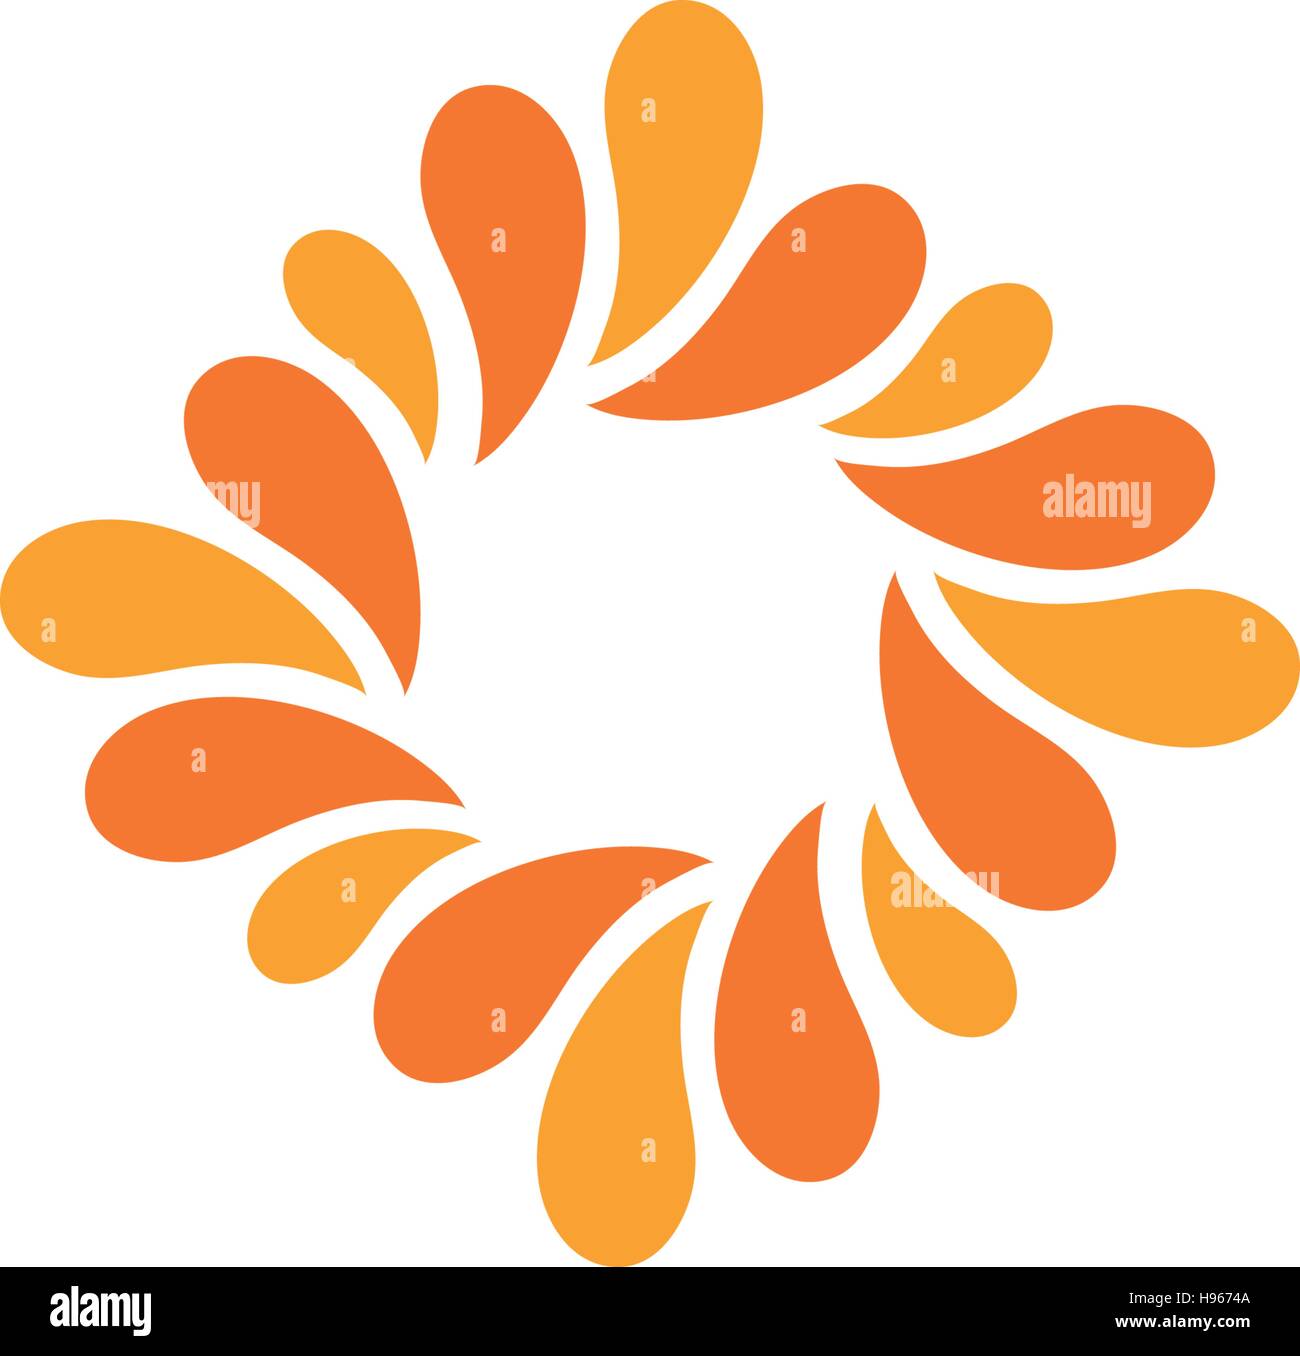 Isolated abstract orange color logo. Rhombus shape logotype. Flower petals icon. Floral decorative sign. Nature element. Vector illustration. Stock Vector